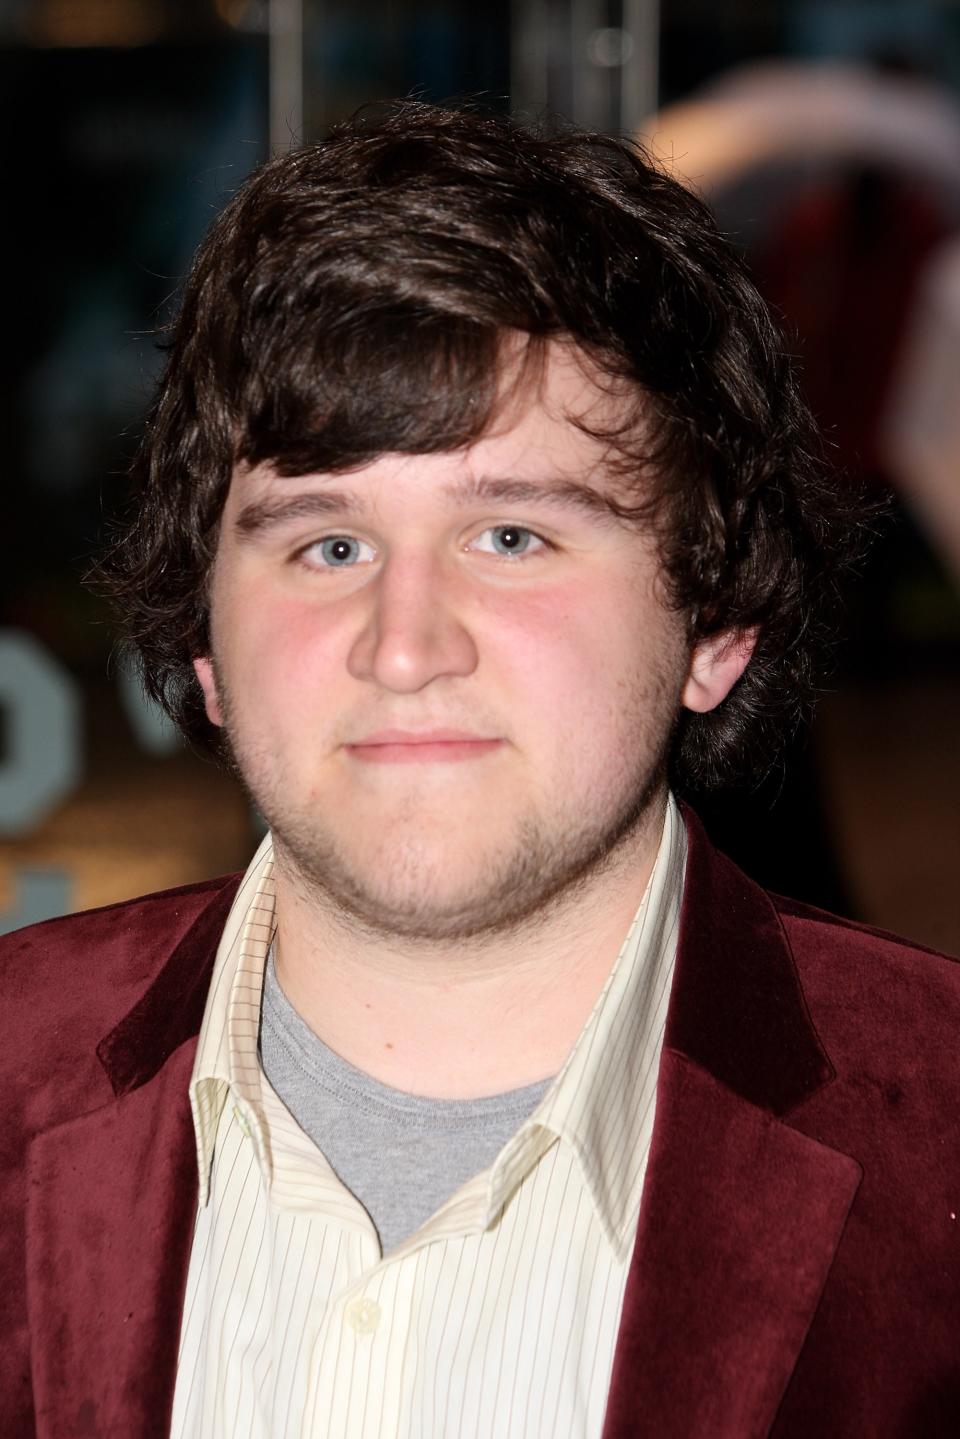 LONDON - JULY 03: Actor Harry Melling arrives at the European premiere of "Harry Potter And The Order Of The Phoenix" at Odeon Leicester Square on July 3, 2007 in London, England. (Photo by Dave Hogan/Getty Images)